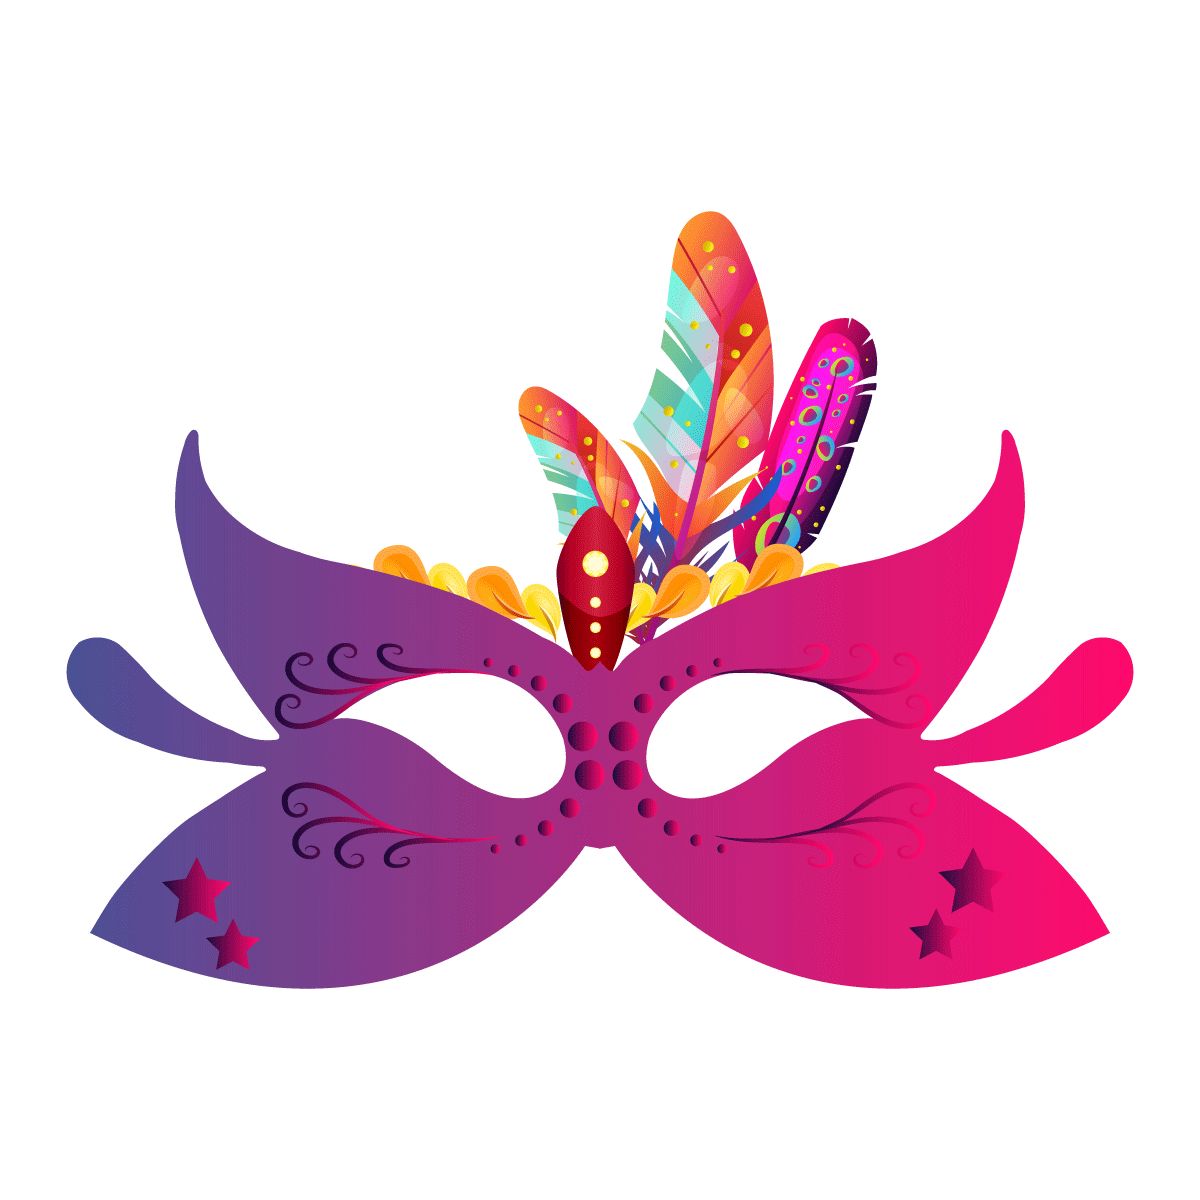 Carnival design festival Holiday ILLUSTRATION  Isolated mask Masquerade party vector